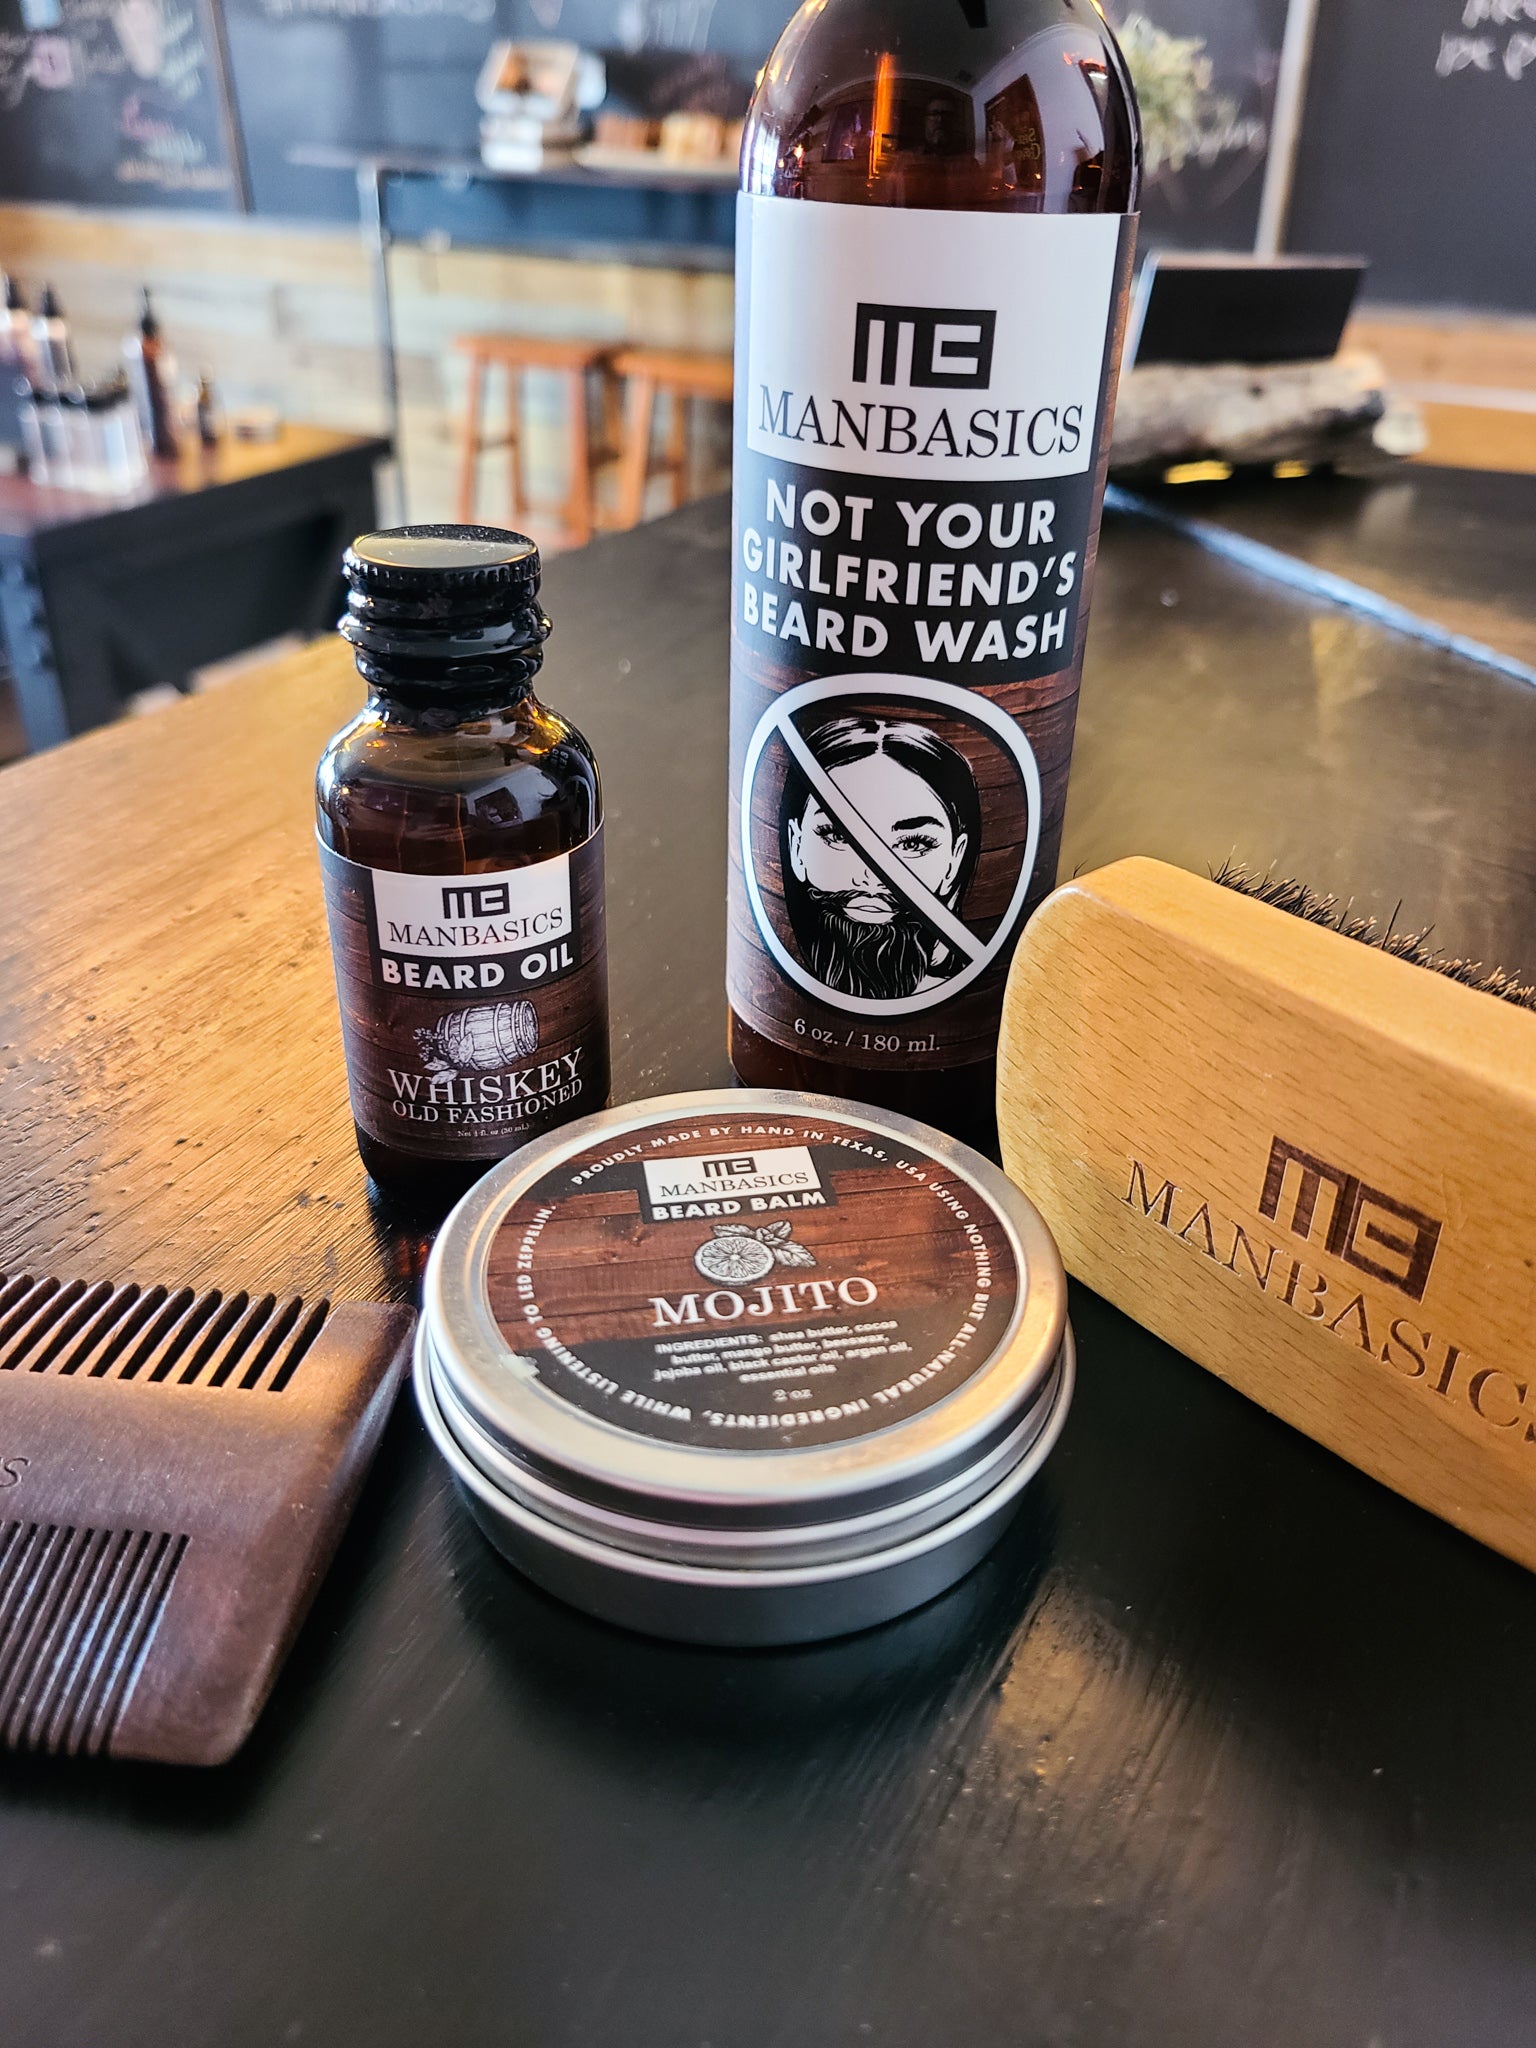 What's the best beard care products?